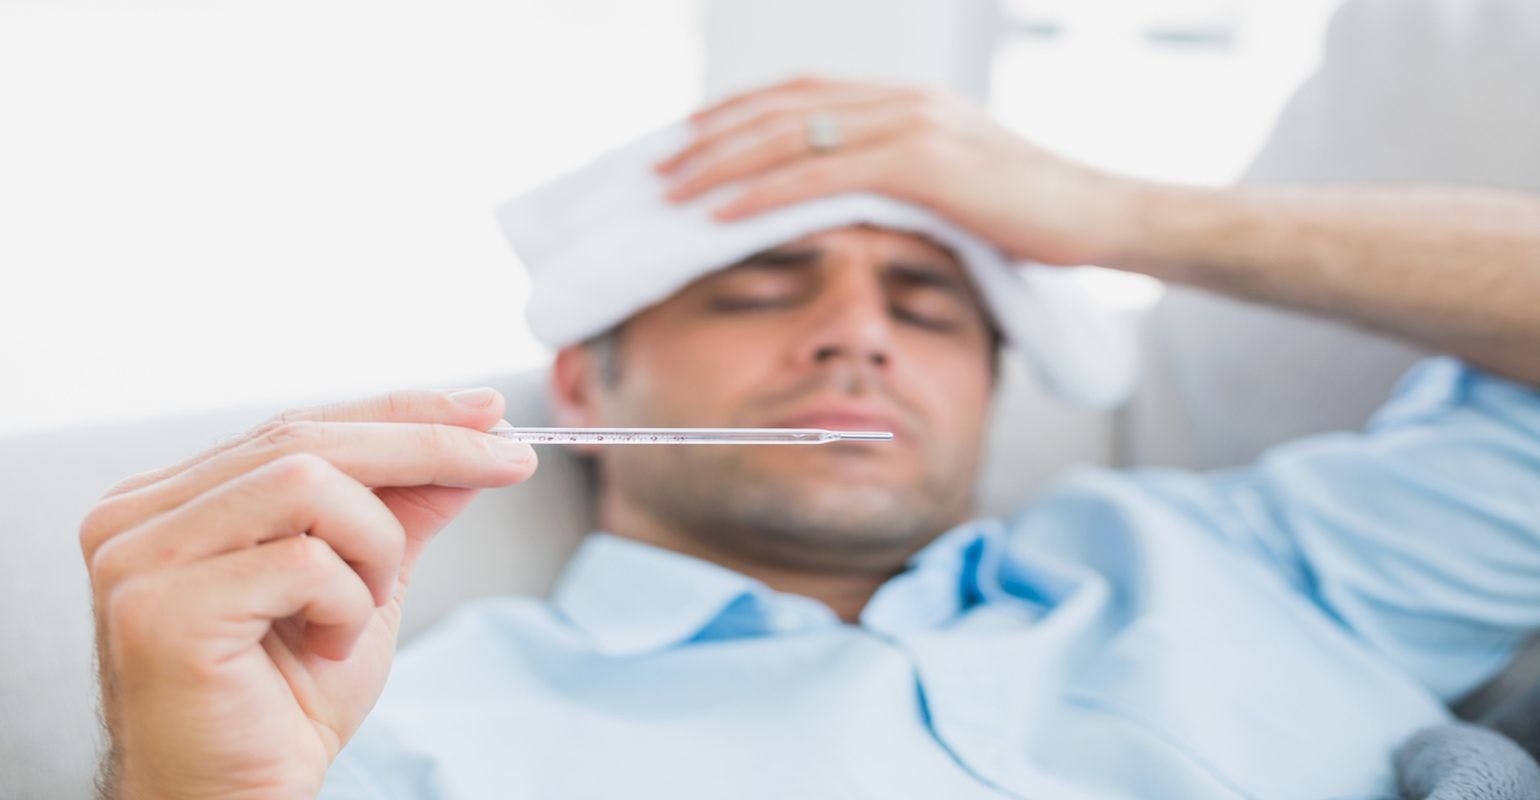 Too Sick to Work? Expert Weighs the Decision